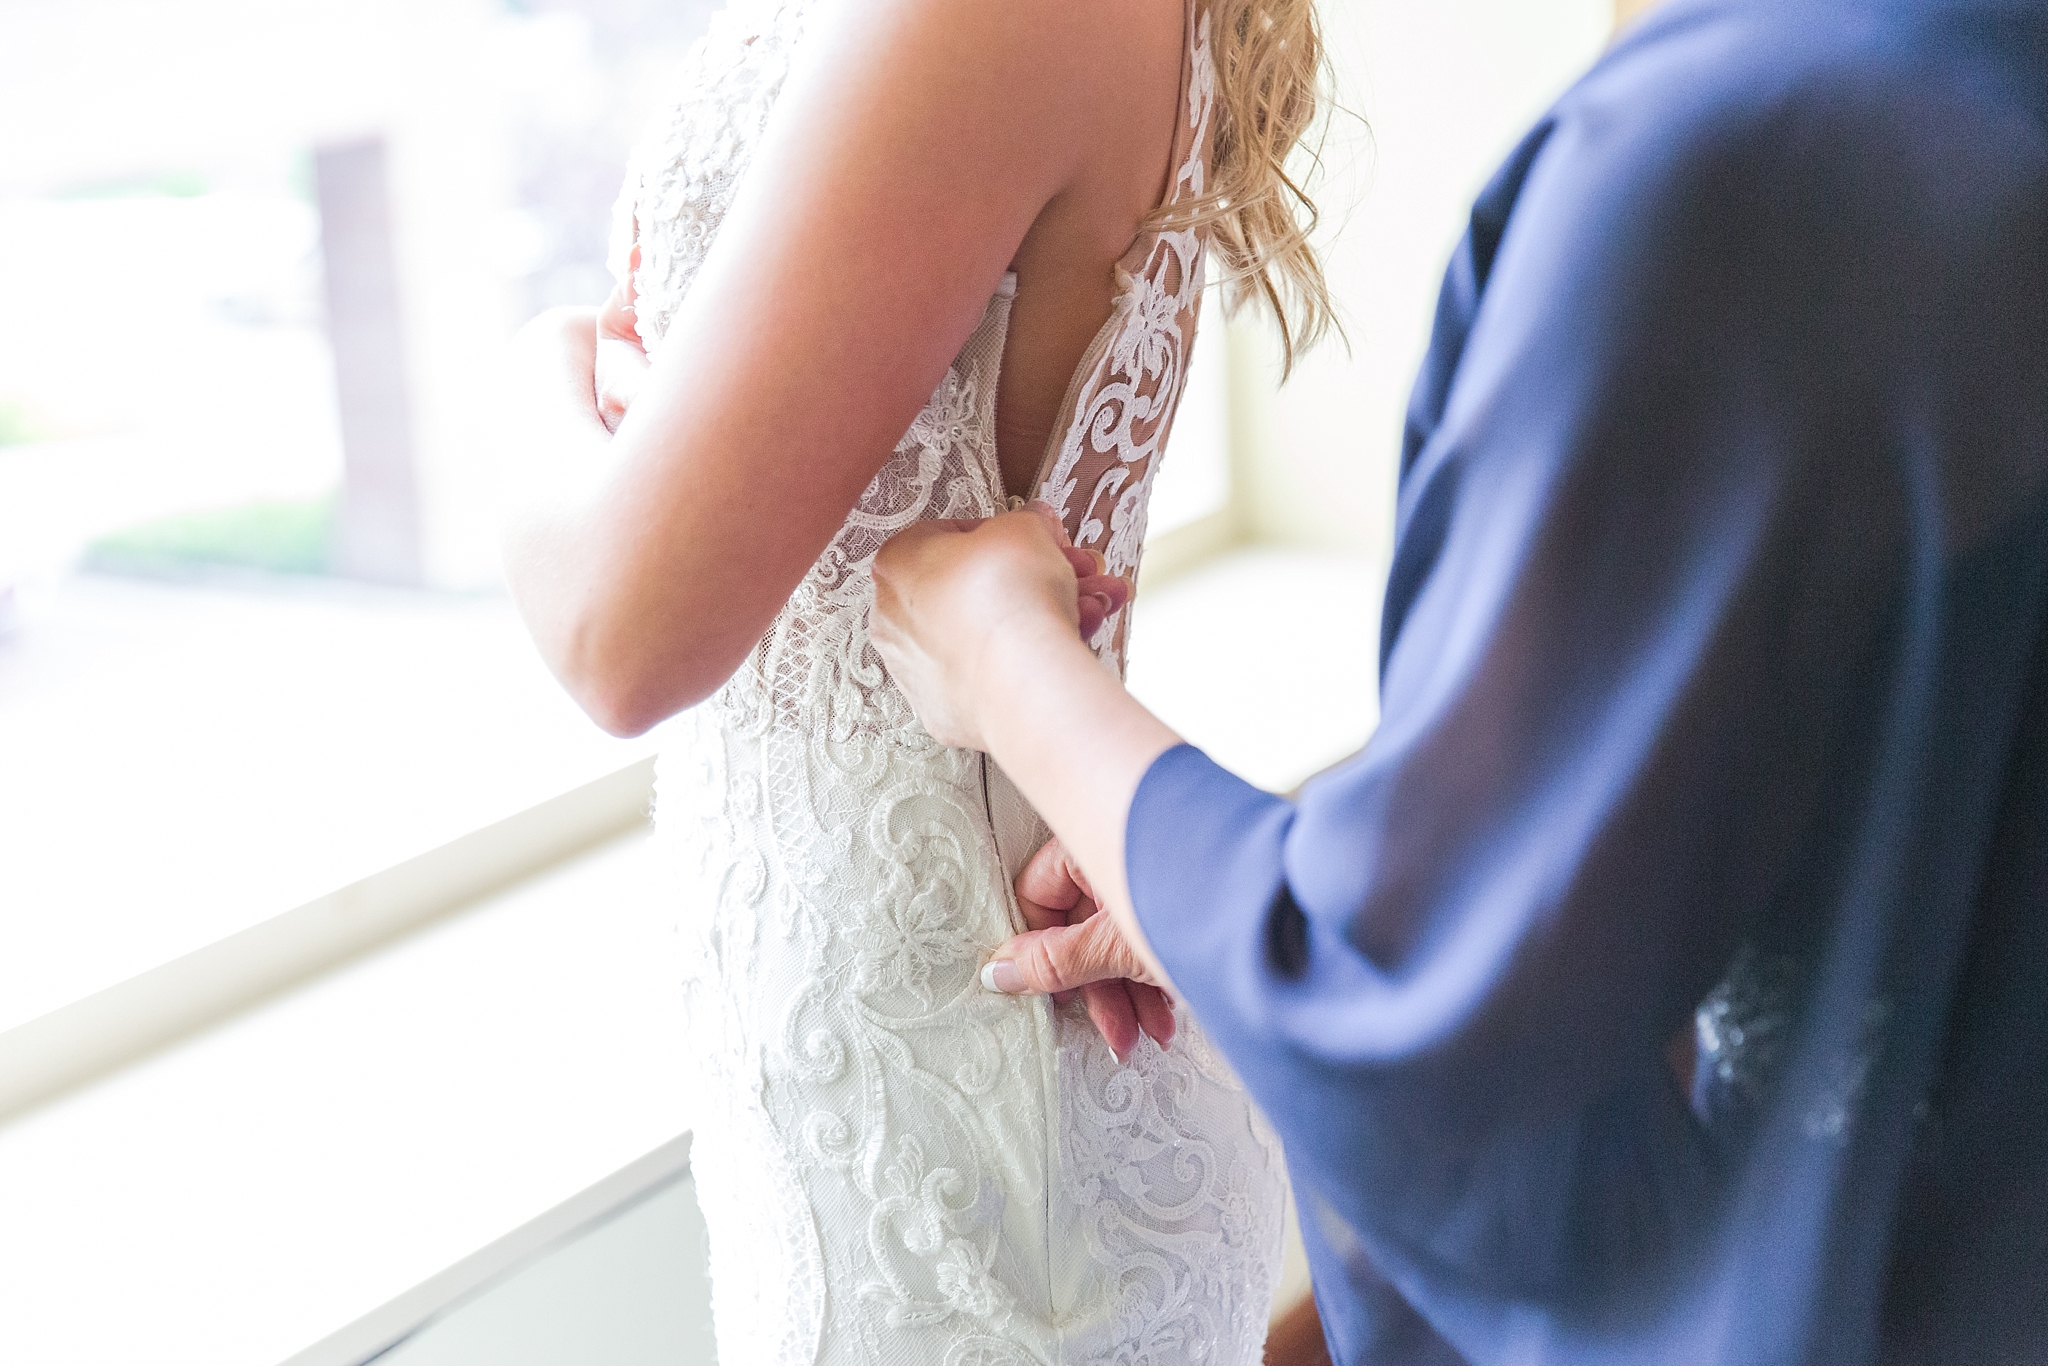 candid-romantic-wedding-photos-at-the-h-hotel-in-midland-michigan-by-courtney-carolyn-photography_0009.jpg